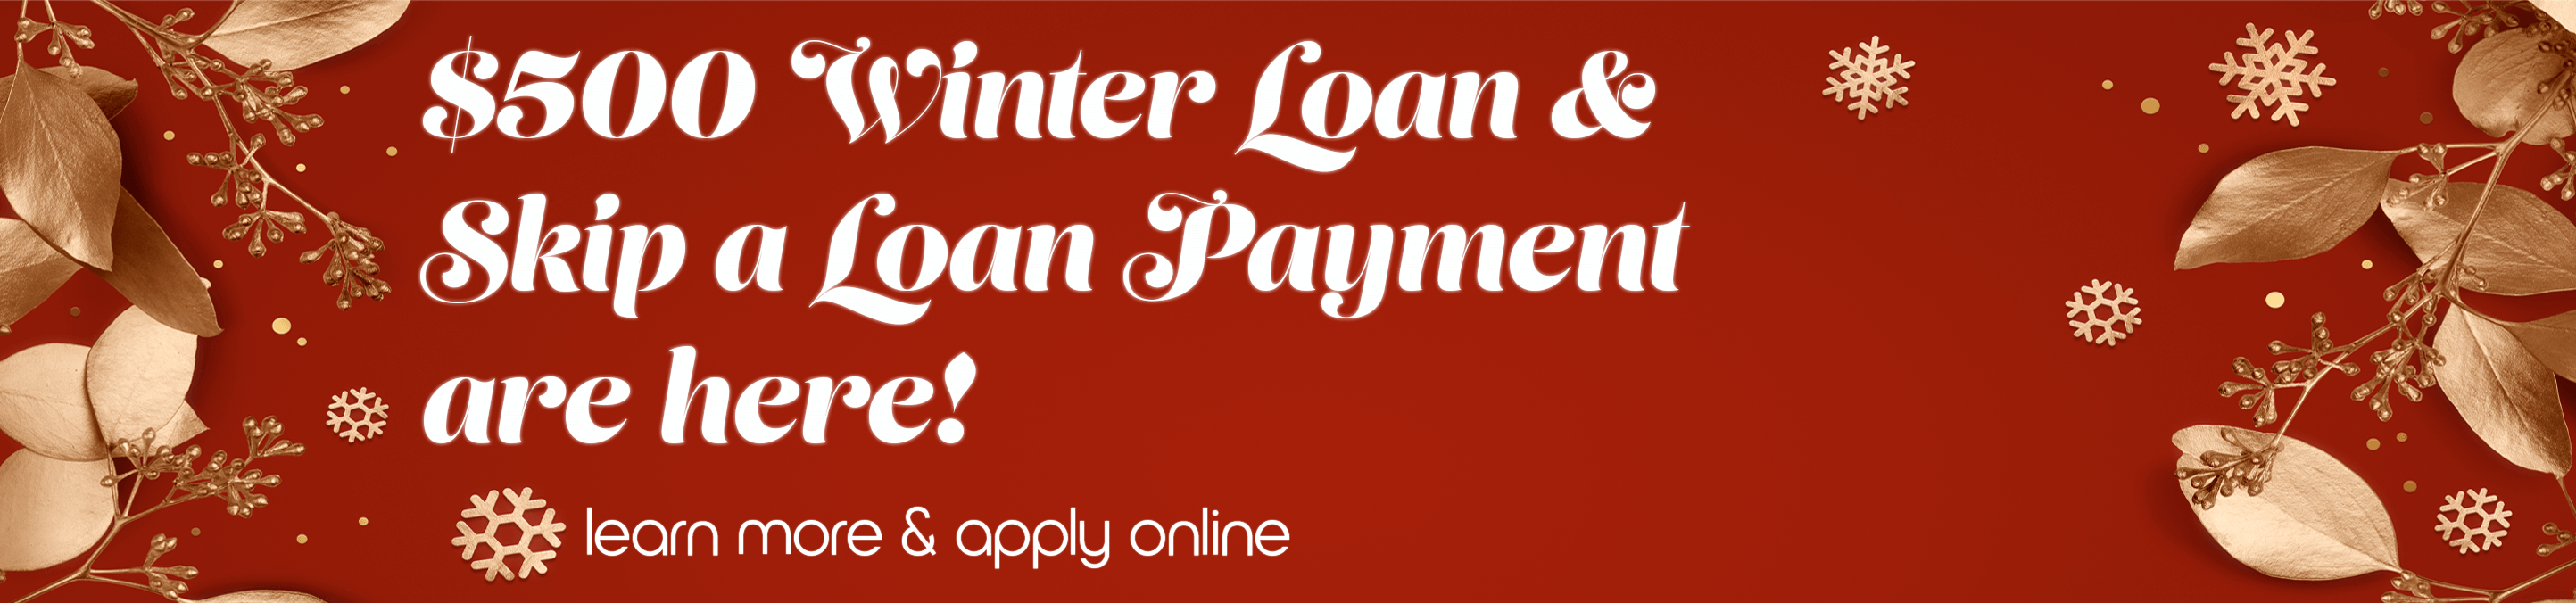 Metro's $500 Winter Loan and Skip A Loan Payment are here!